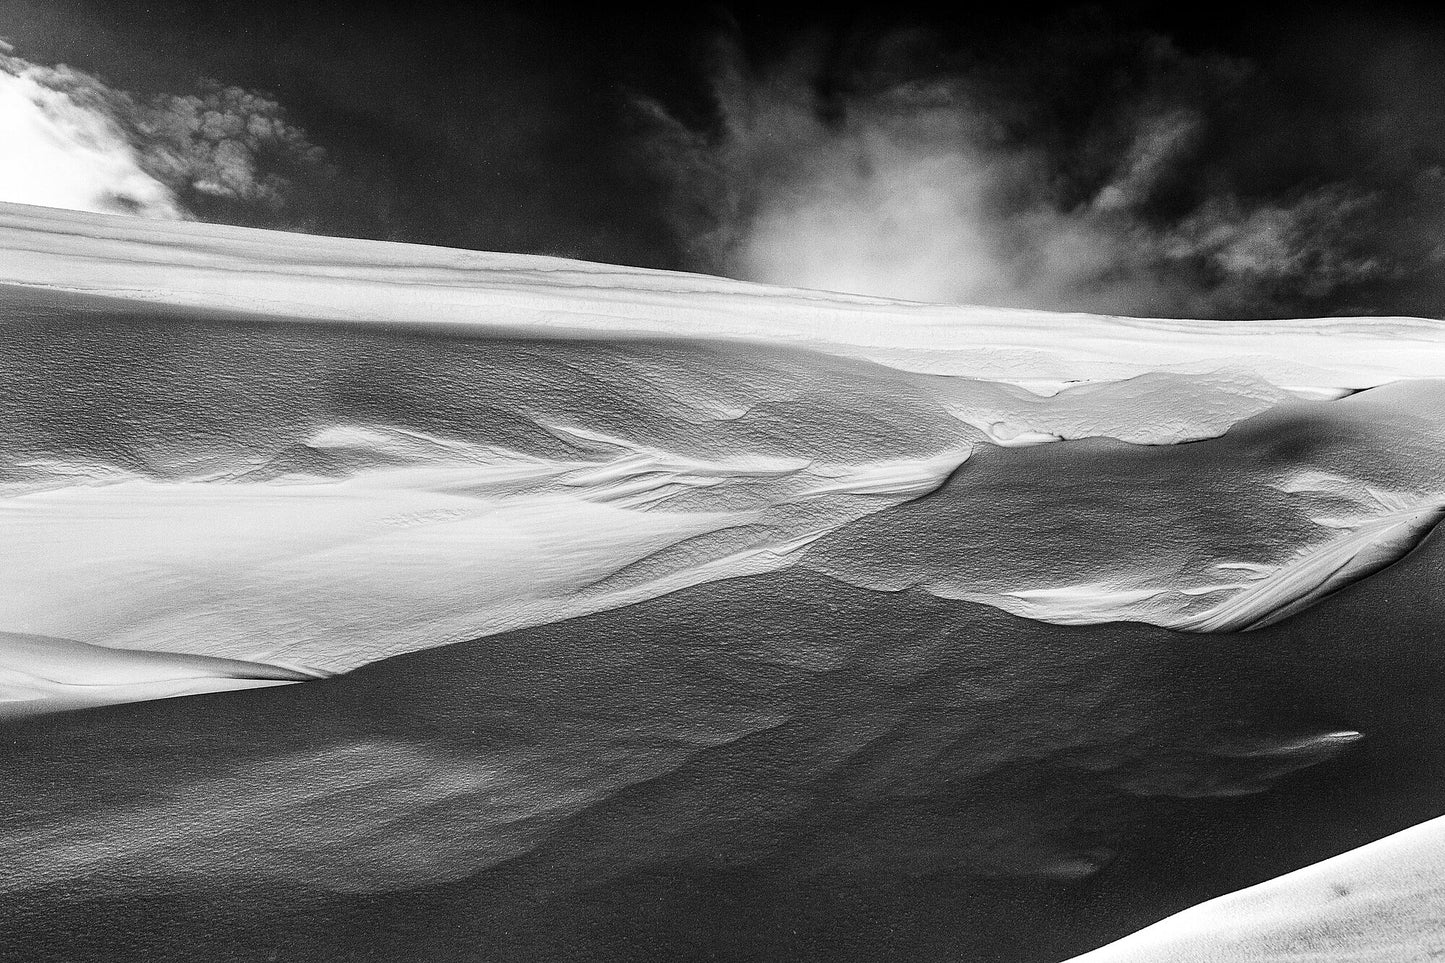 Black and white photograph capturing a detailed view of a wind-sculpted snowy ravine wall in the Arctic wilderness.